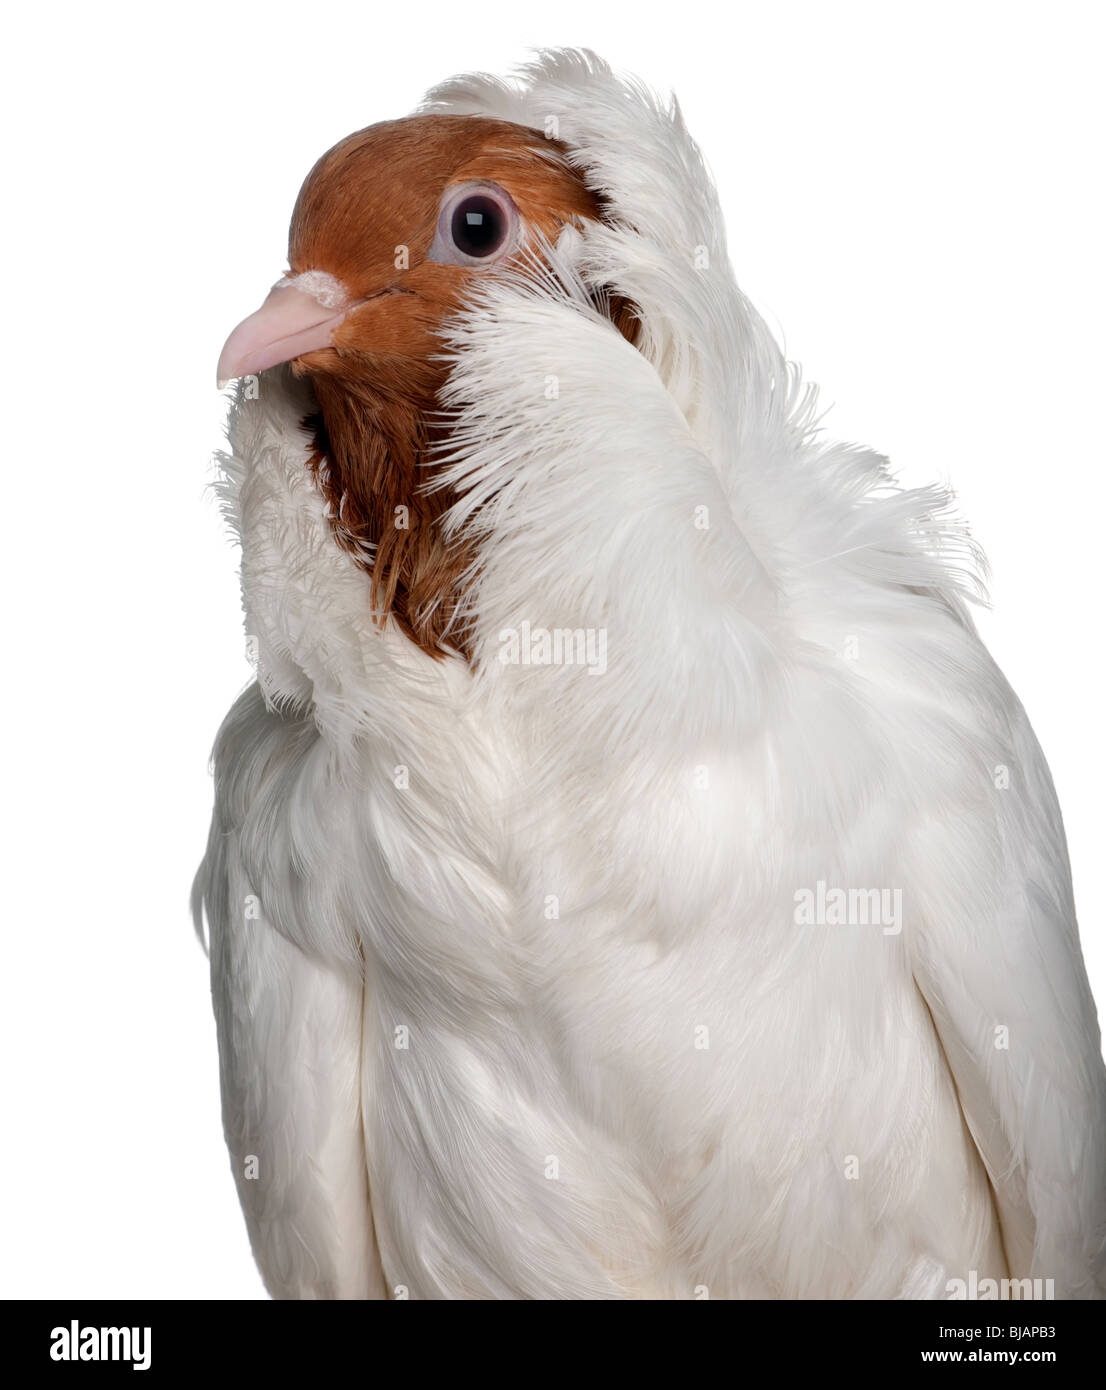 German helmet with feathered feet pigeon in front of white background Stock Photo